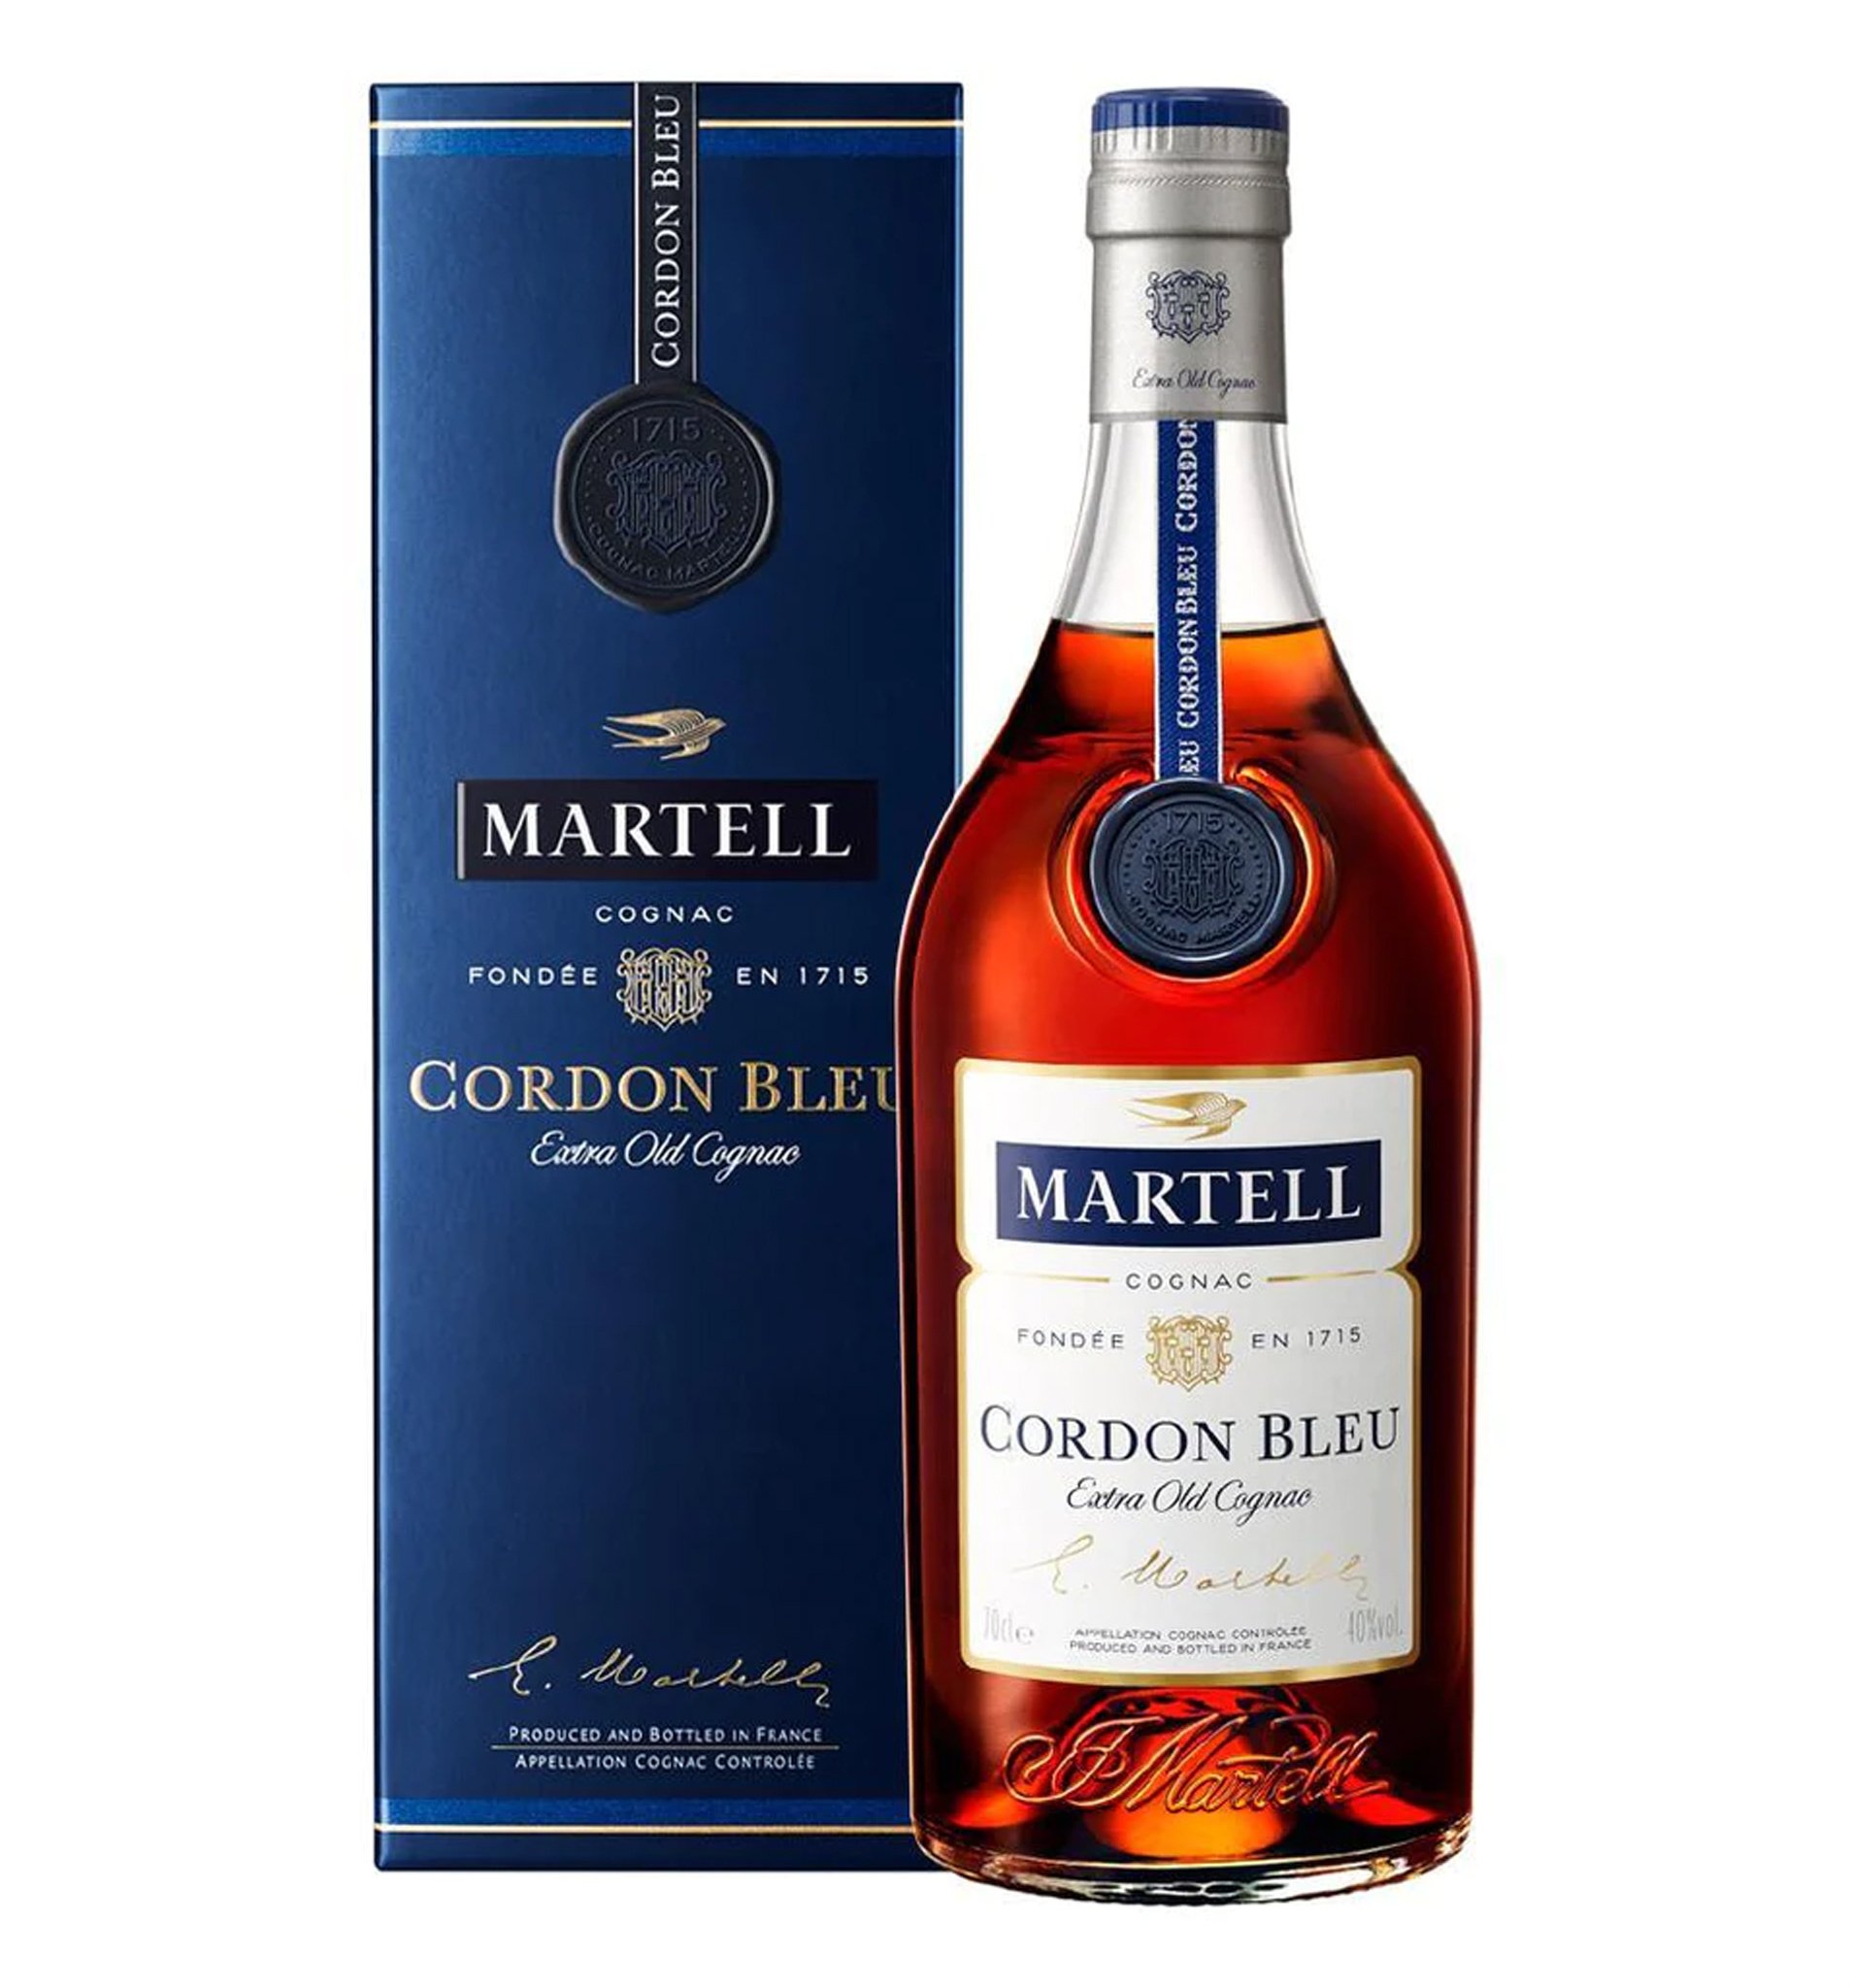 Martell Cordon Bleu Cognac 750ml $178 FREE DELIVERY - Uncle Fossil 